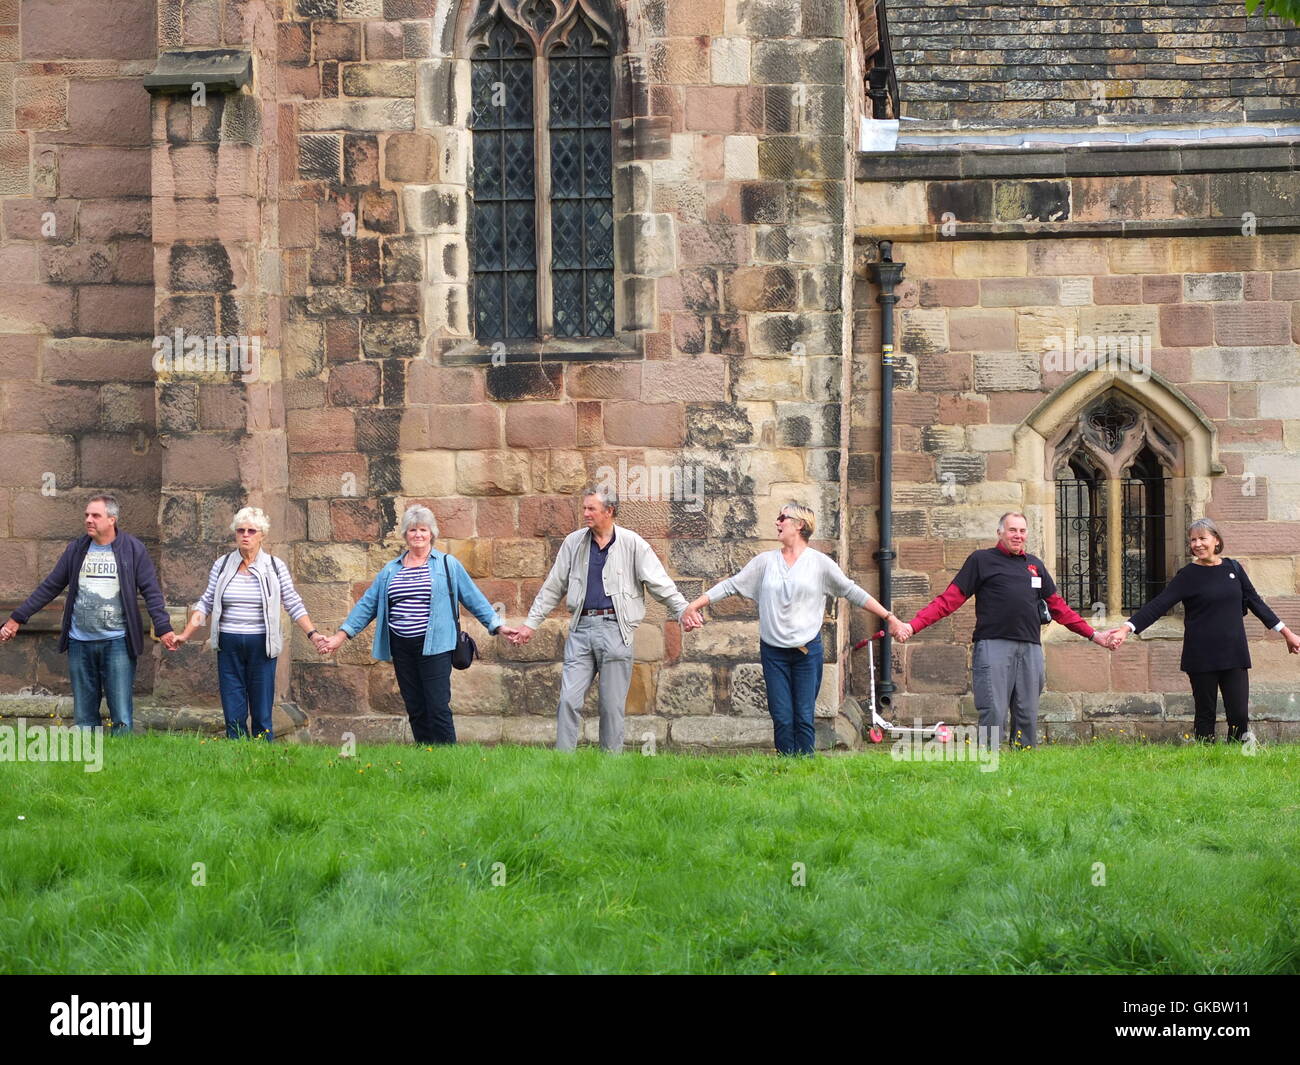 Clypping (or 'Clipping') the Church at Wirksworth, Derbyshire - townsfolk link arms and 'embrace' the church. Stock Photo